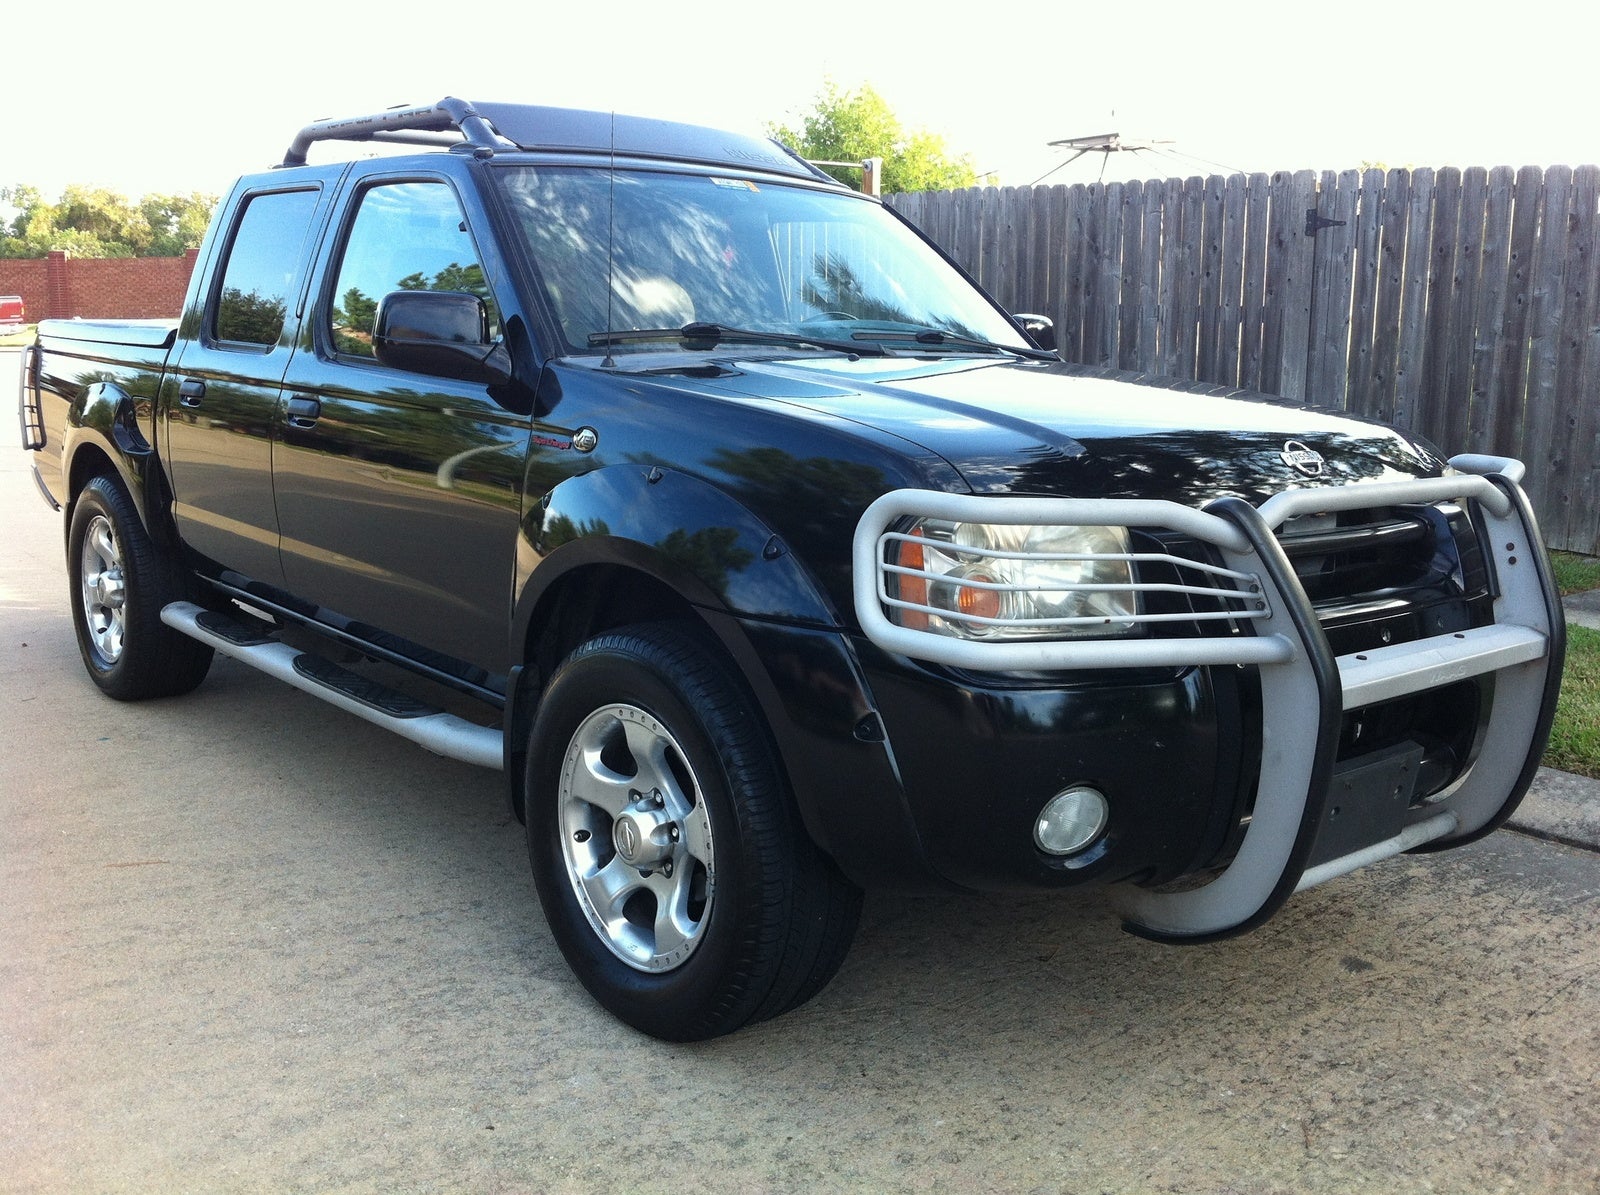 2001 Nissan frontier crew cab supercharged #1